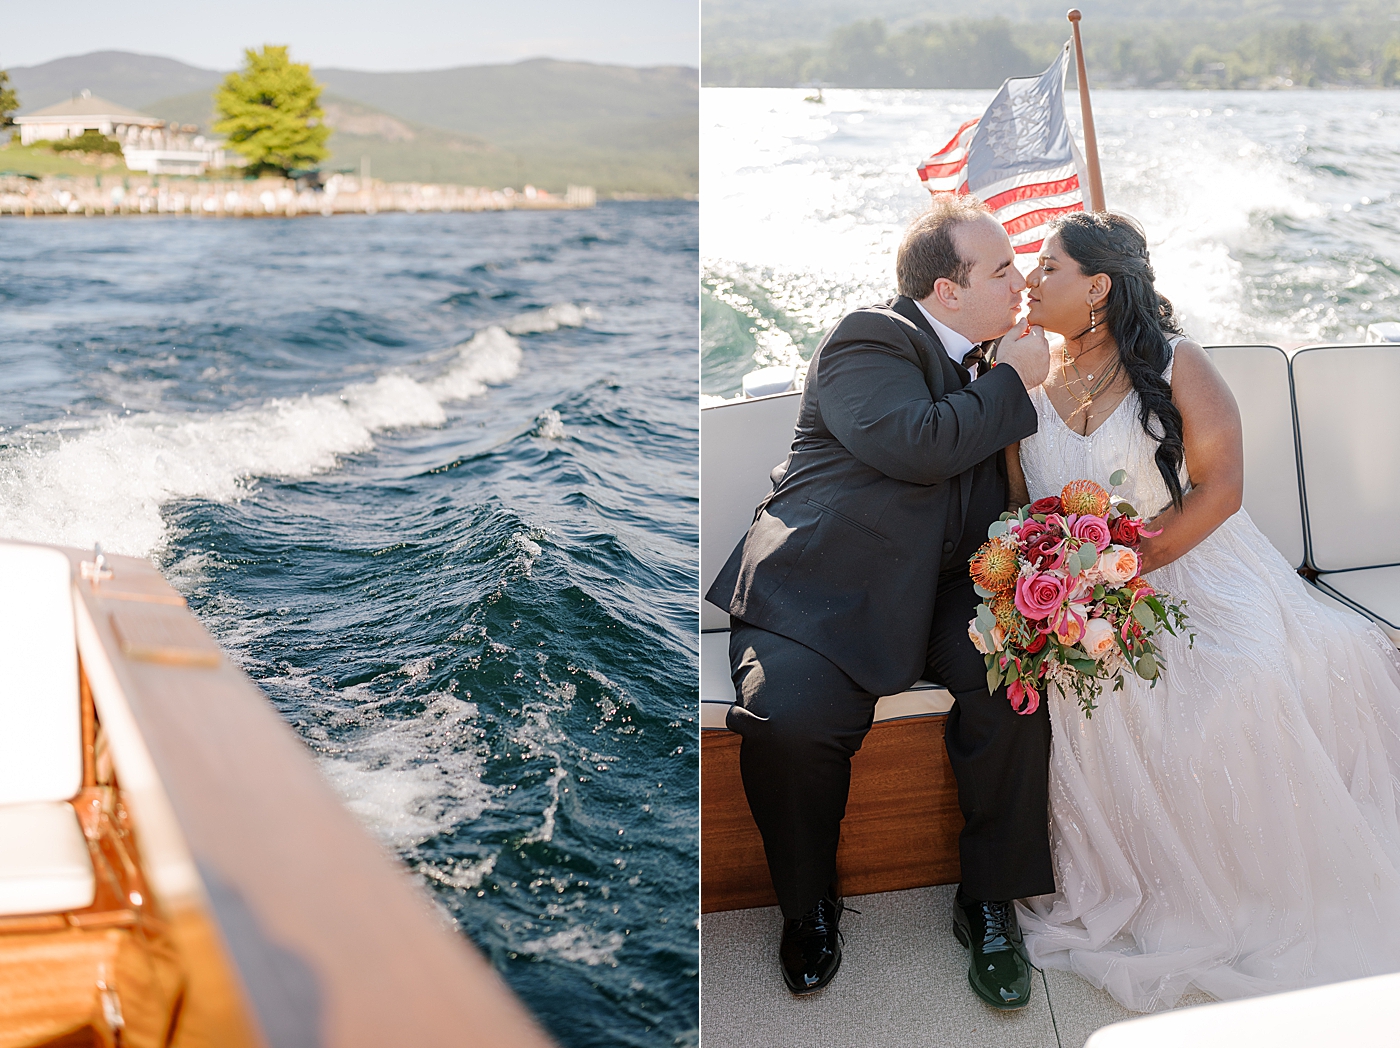 Double image of location details and a bride and groom kissing in the back of a boat | Image by Hope Helmuth Photography